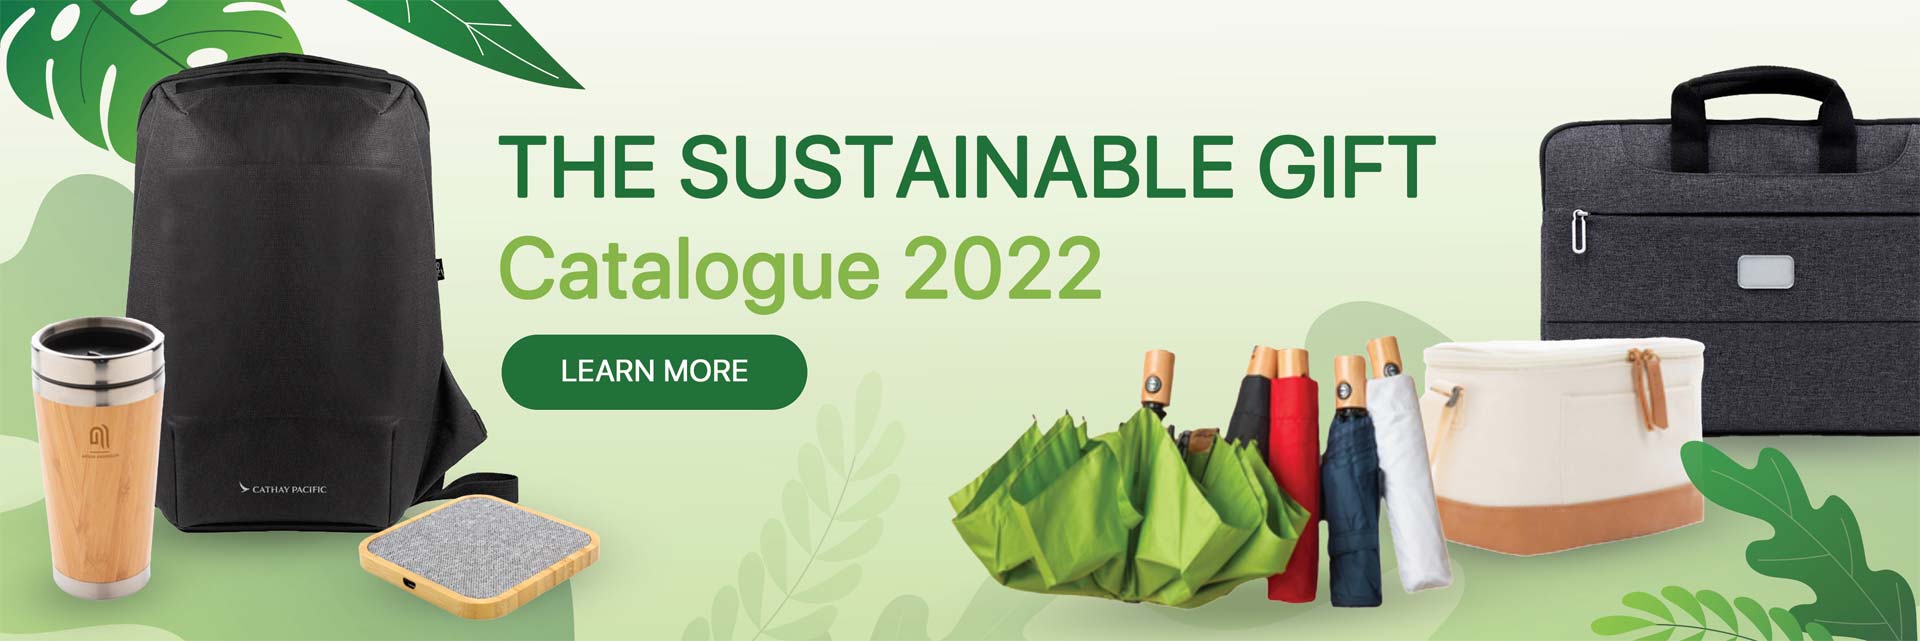 Axxel_Sustainable-Gift-Catalogue-Banner_1920x641.jpg